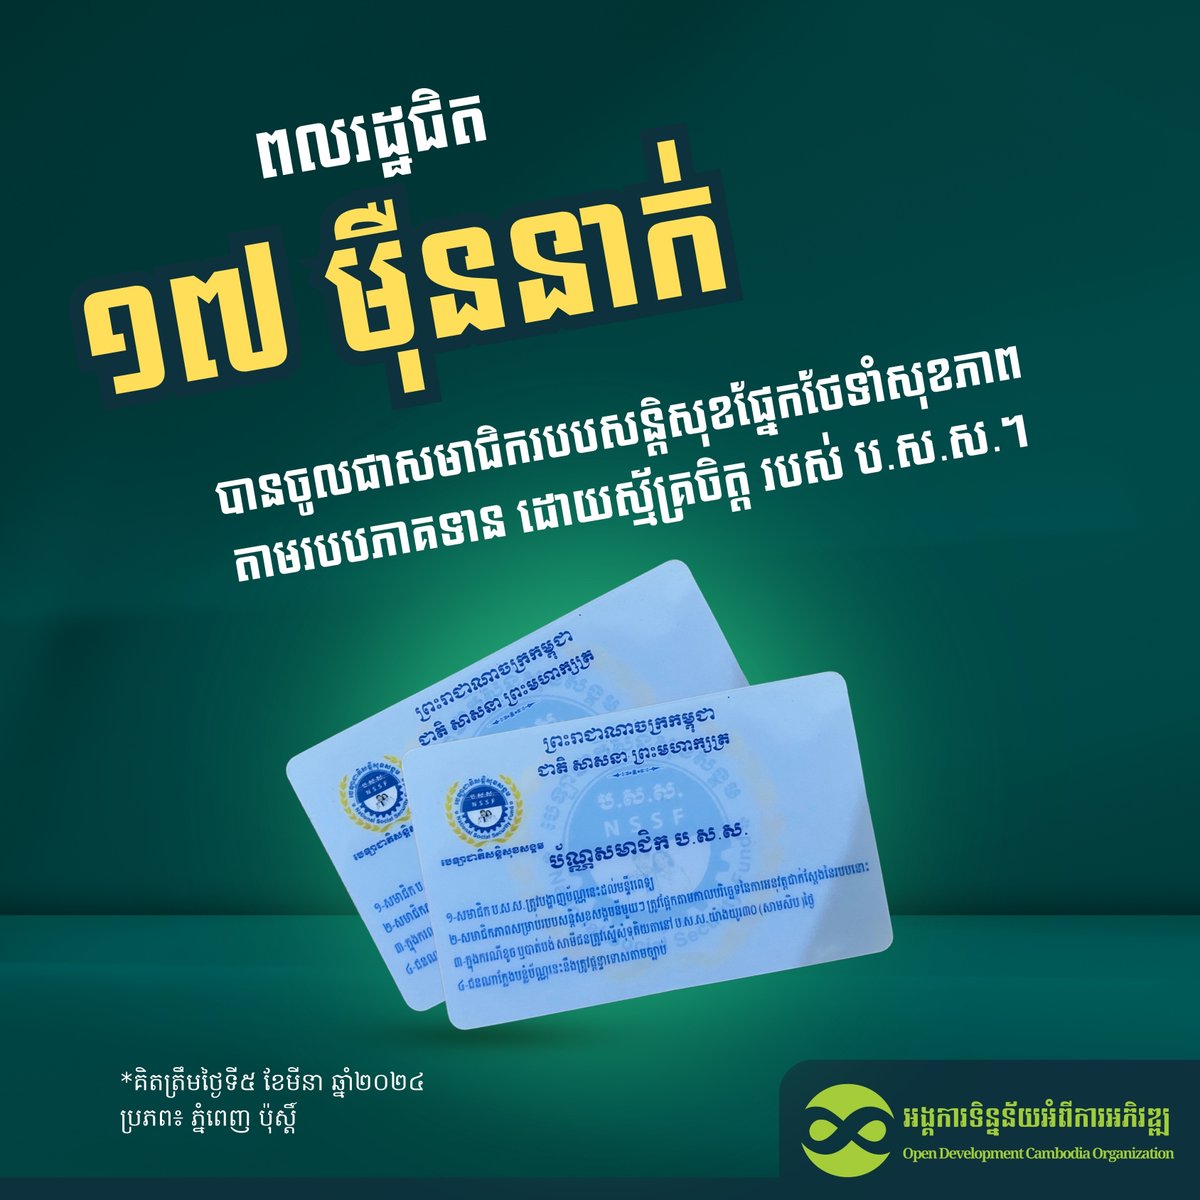 🪪 Based on an article by The Phnom Penh Post published on 12 March 2024, there were almost nearly 170,000 individuals who enrolled as the members of the NSSF (Estimated by 5 March 2024). 👉 Original Article: phnompenhpost.com/national/nssf-… #NSSF #ThePhnomPenhPost #News #ODC